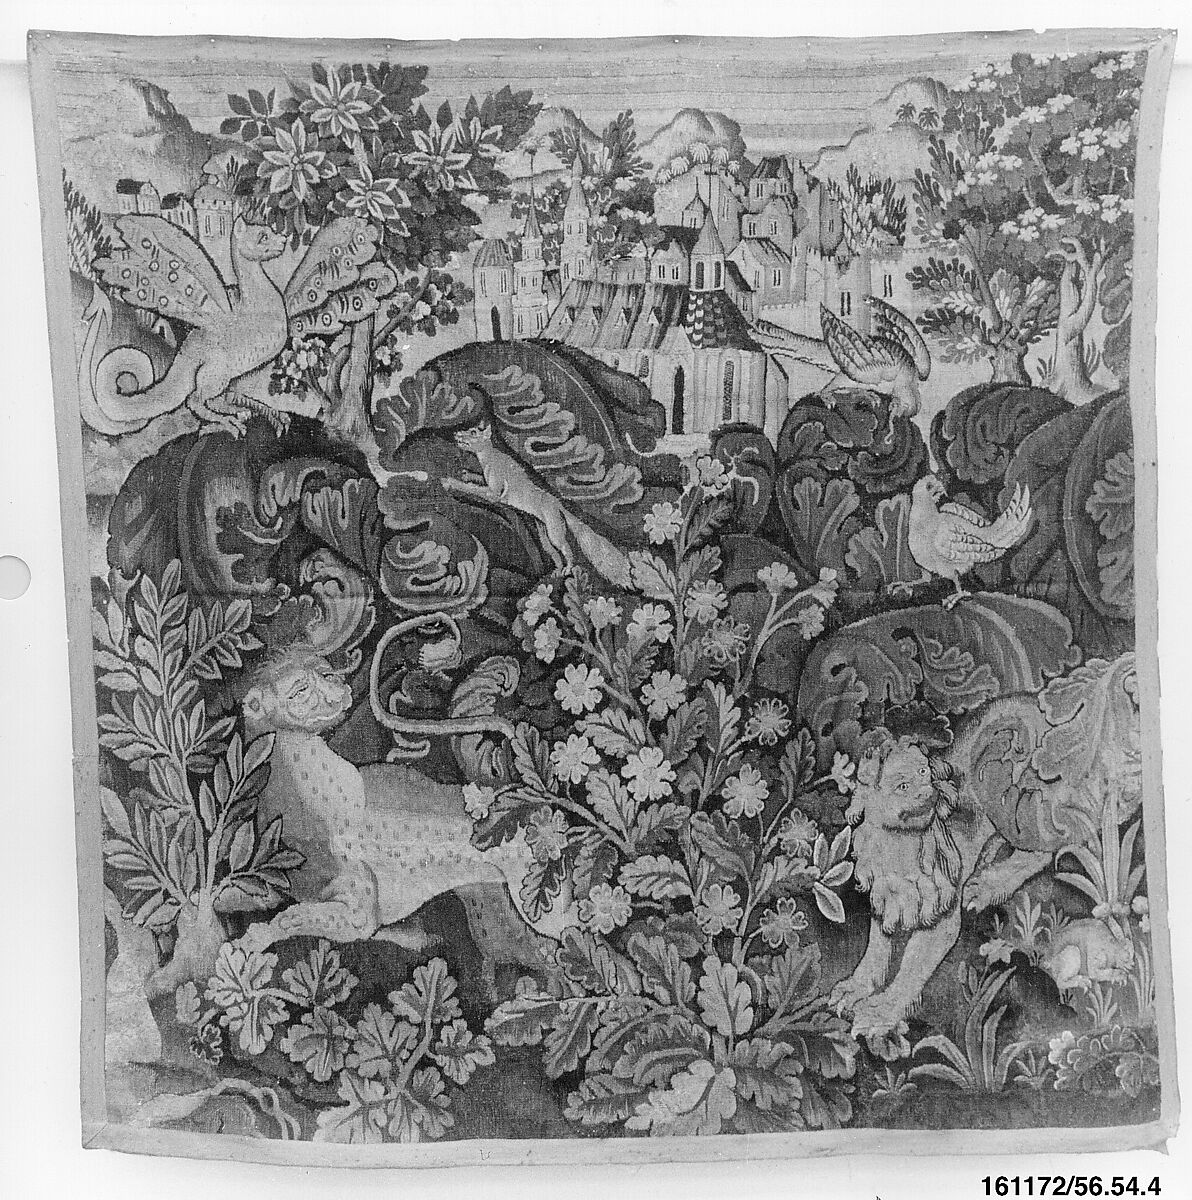 Verdure with animals and landscapes, Wool (9-11 warps per inch, 4-5 per cm.), Flemish 